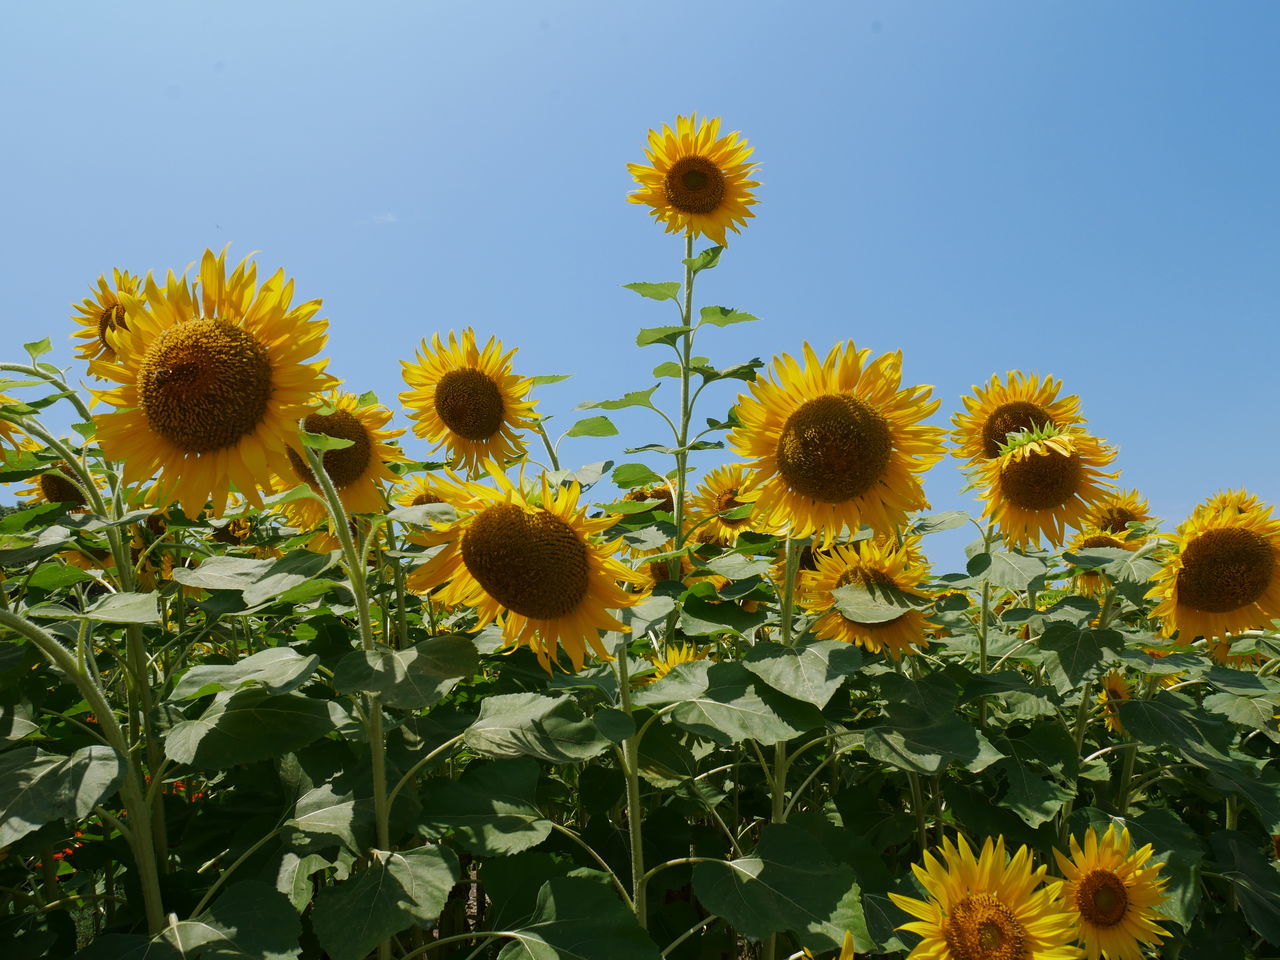 CLOSE-UP OF SUNFLOWERS IN FIELD